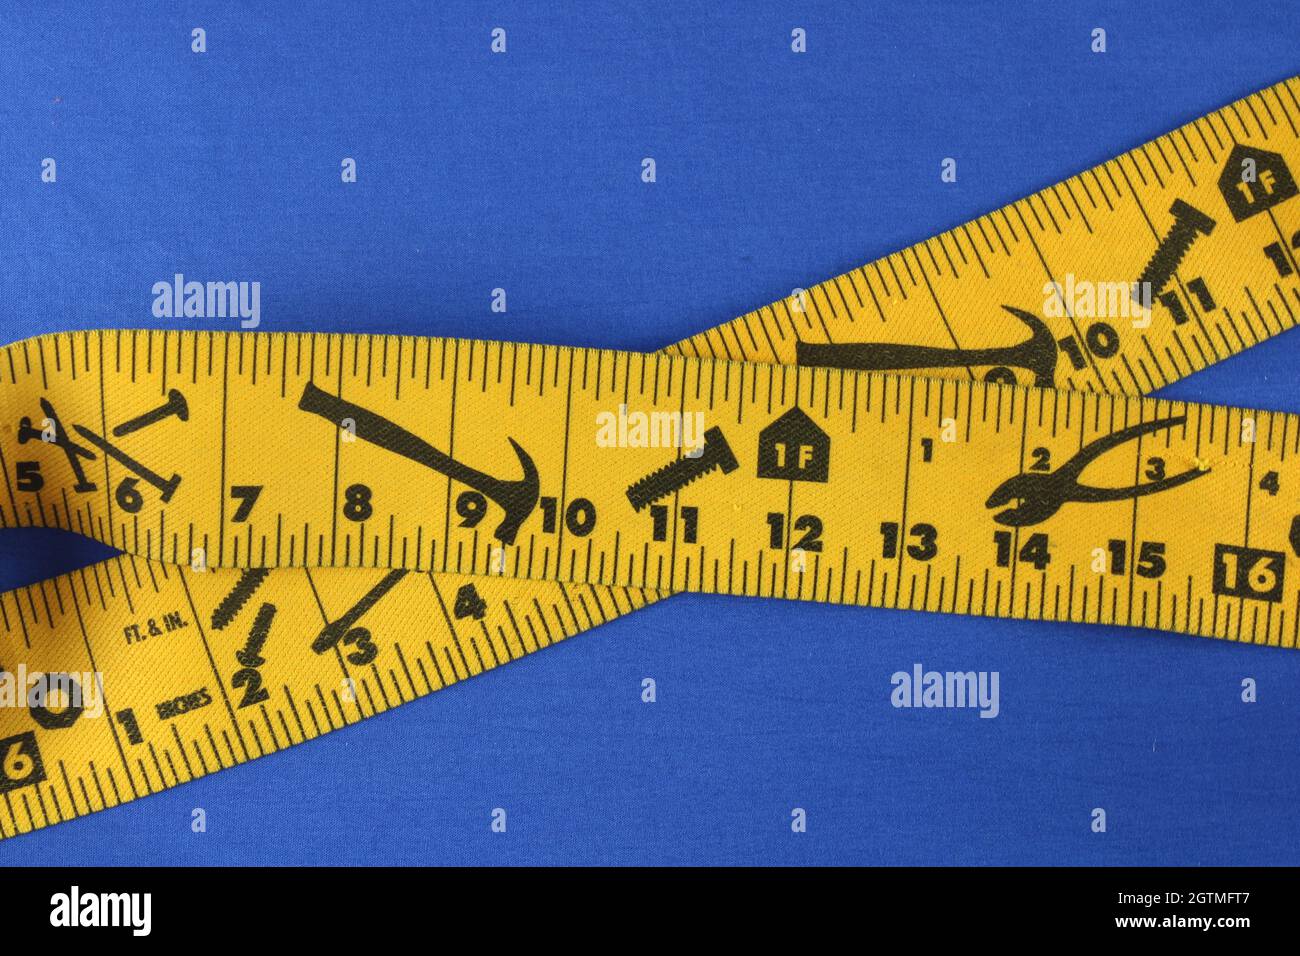 https://c8.alamy.com/comp/2GTMFT7/workmans-tape-measure-securing-straps-with-images-of-hammer-pliers-screws-and-nails-isolated-on-chroma-blue-background-with-copy-space-2GTMFT7.jpg